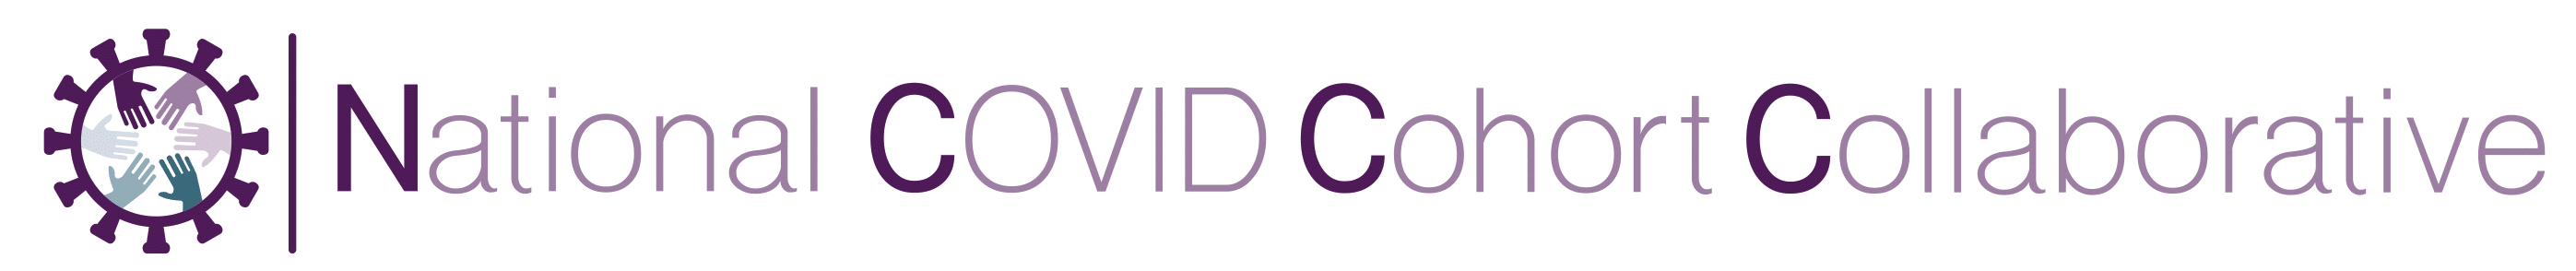 Banner text: National COVID Cohort Collaborative